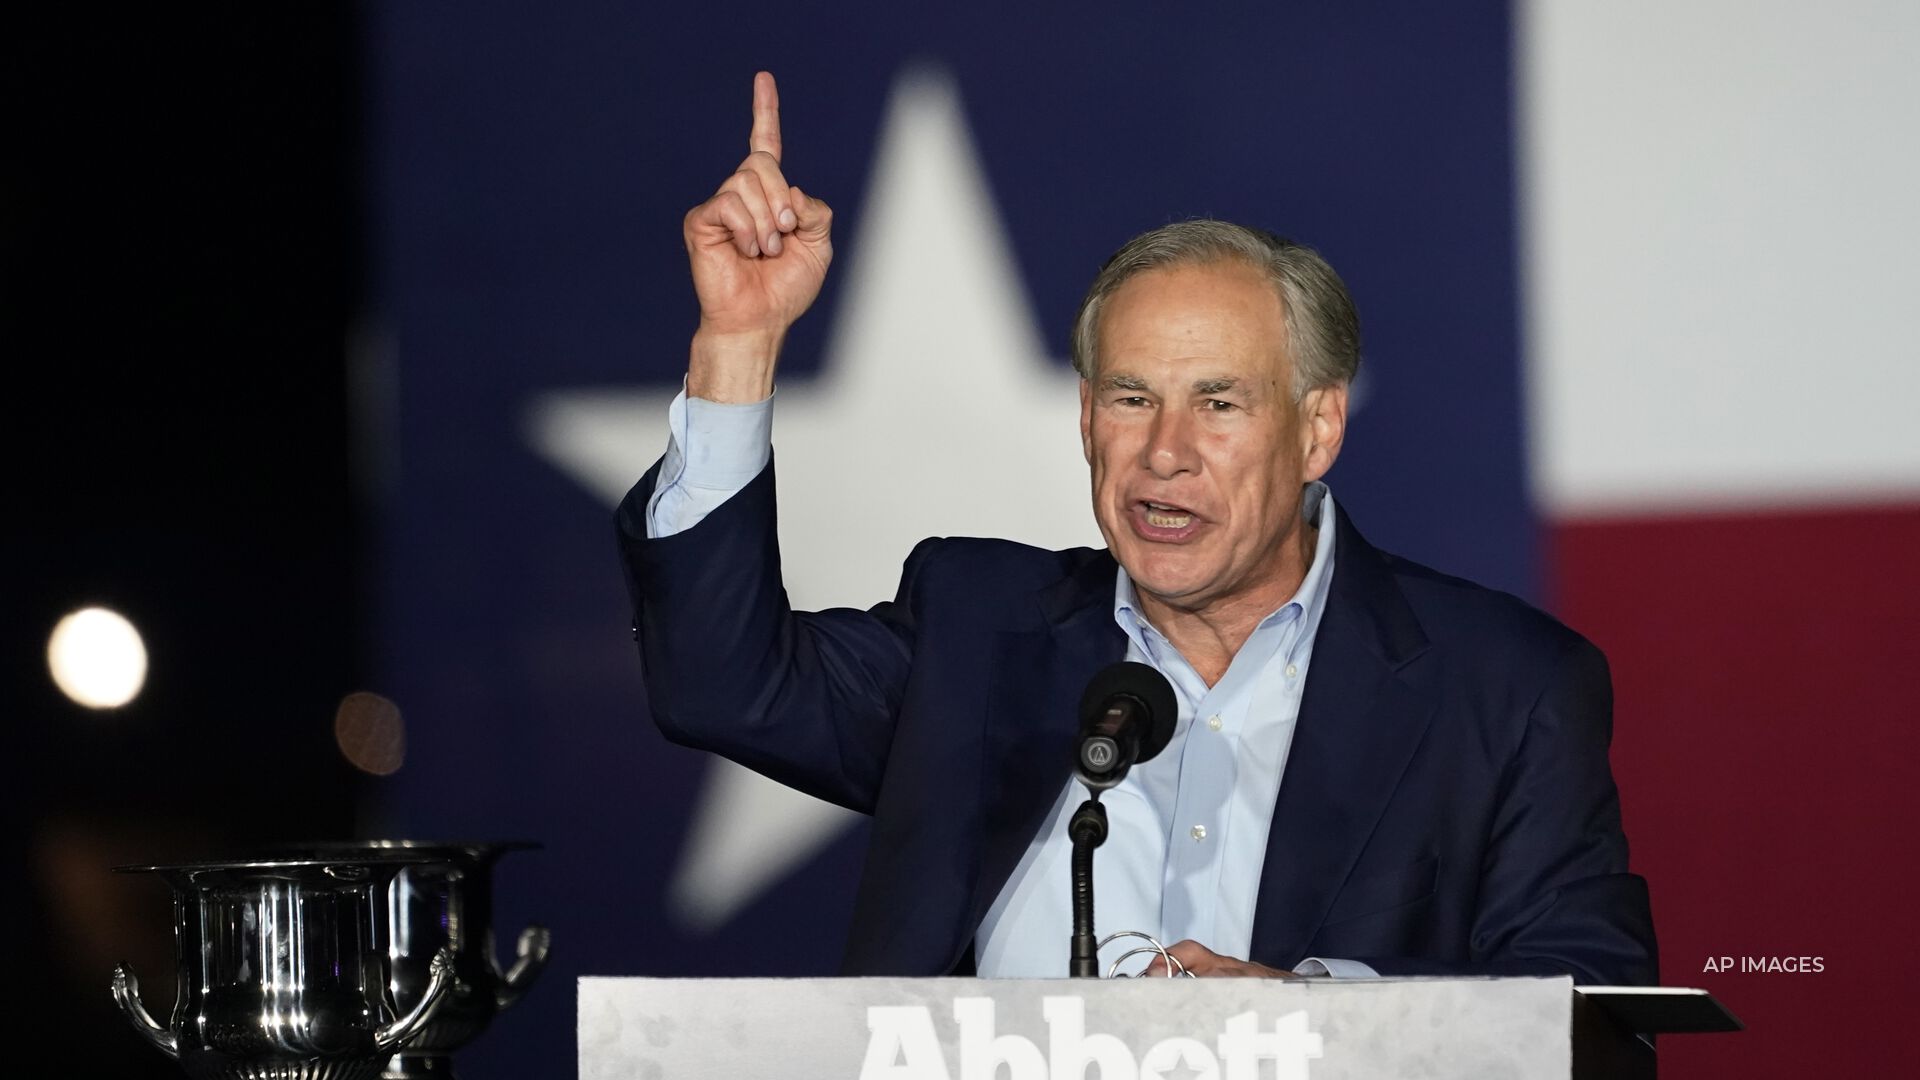 The Texas gubernatorial matchup was set up during Tuesday's primary election.